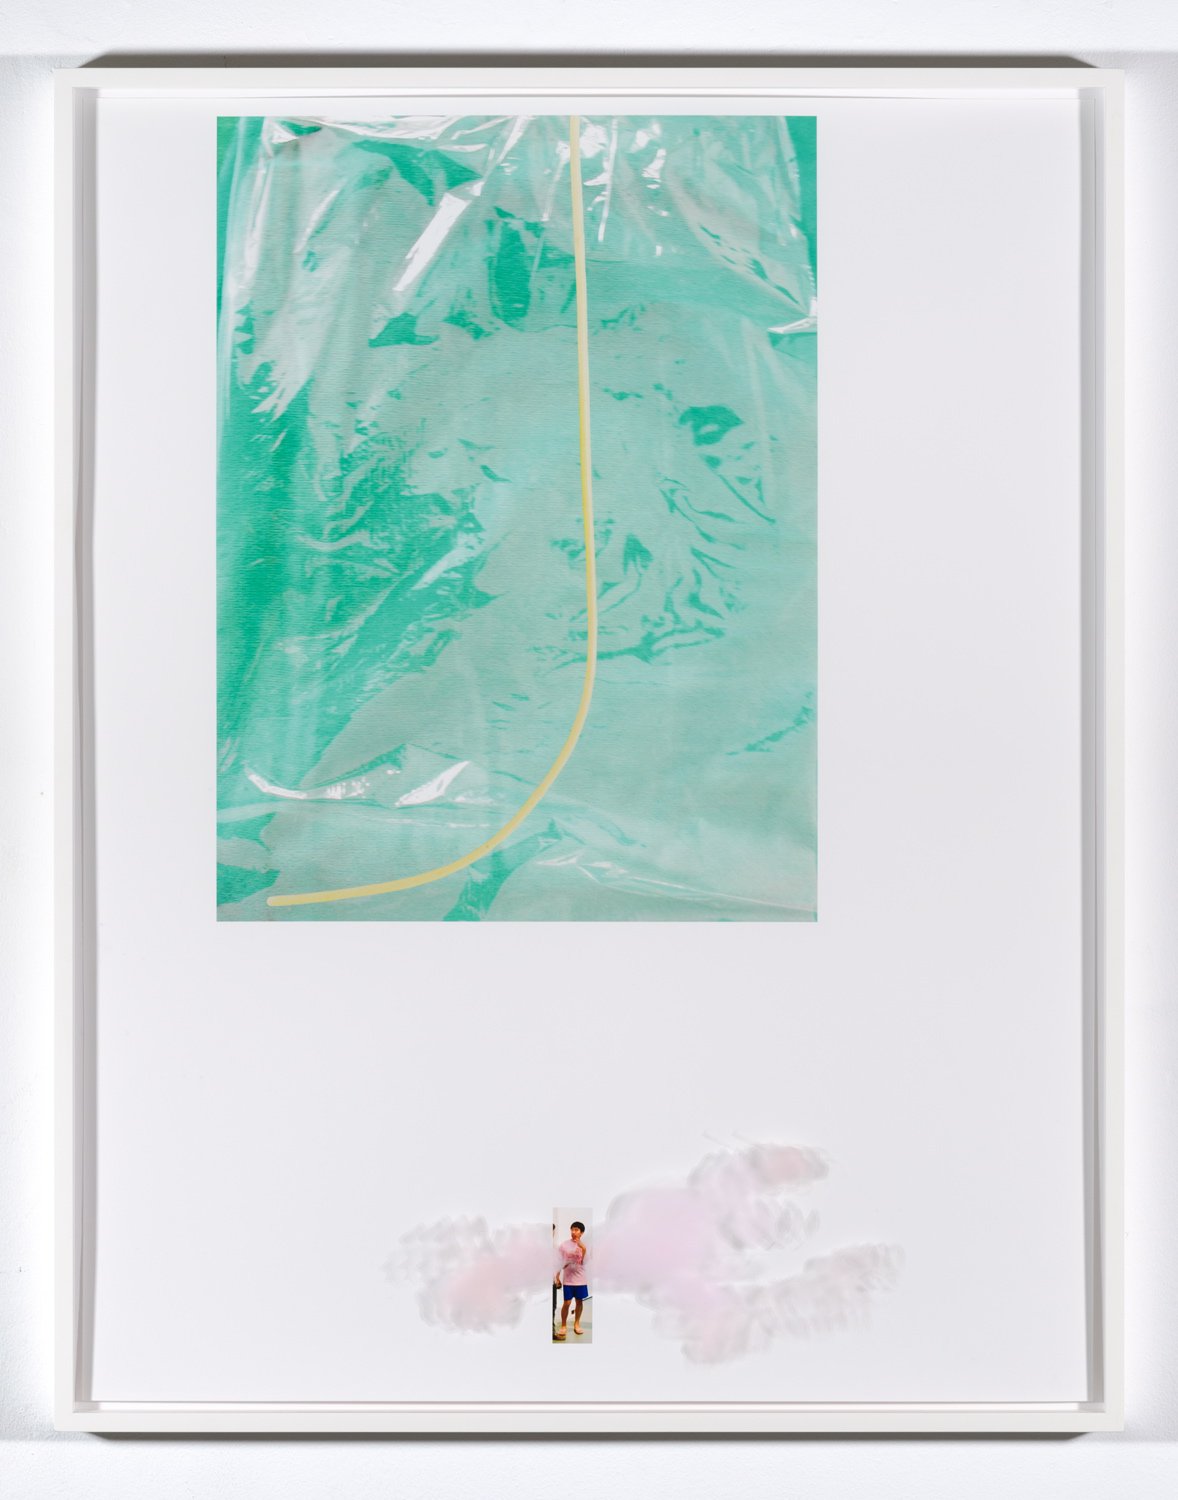 Lisa HolzerEi passing under spaghetti, 2012Pigment print on cotton paper, acrylic on glass92 x 72 cmEdition of 1 plus 1 artist’s proof